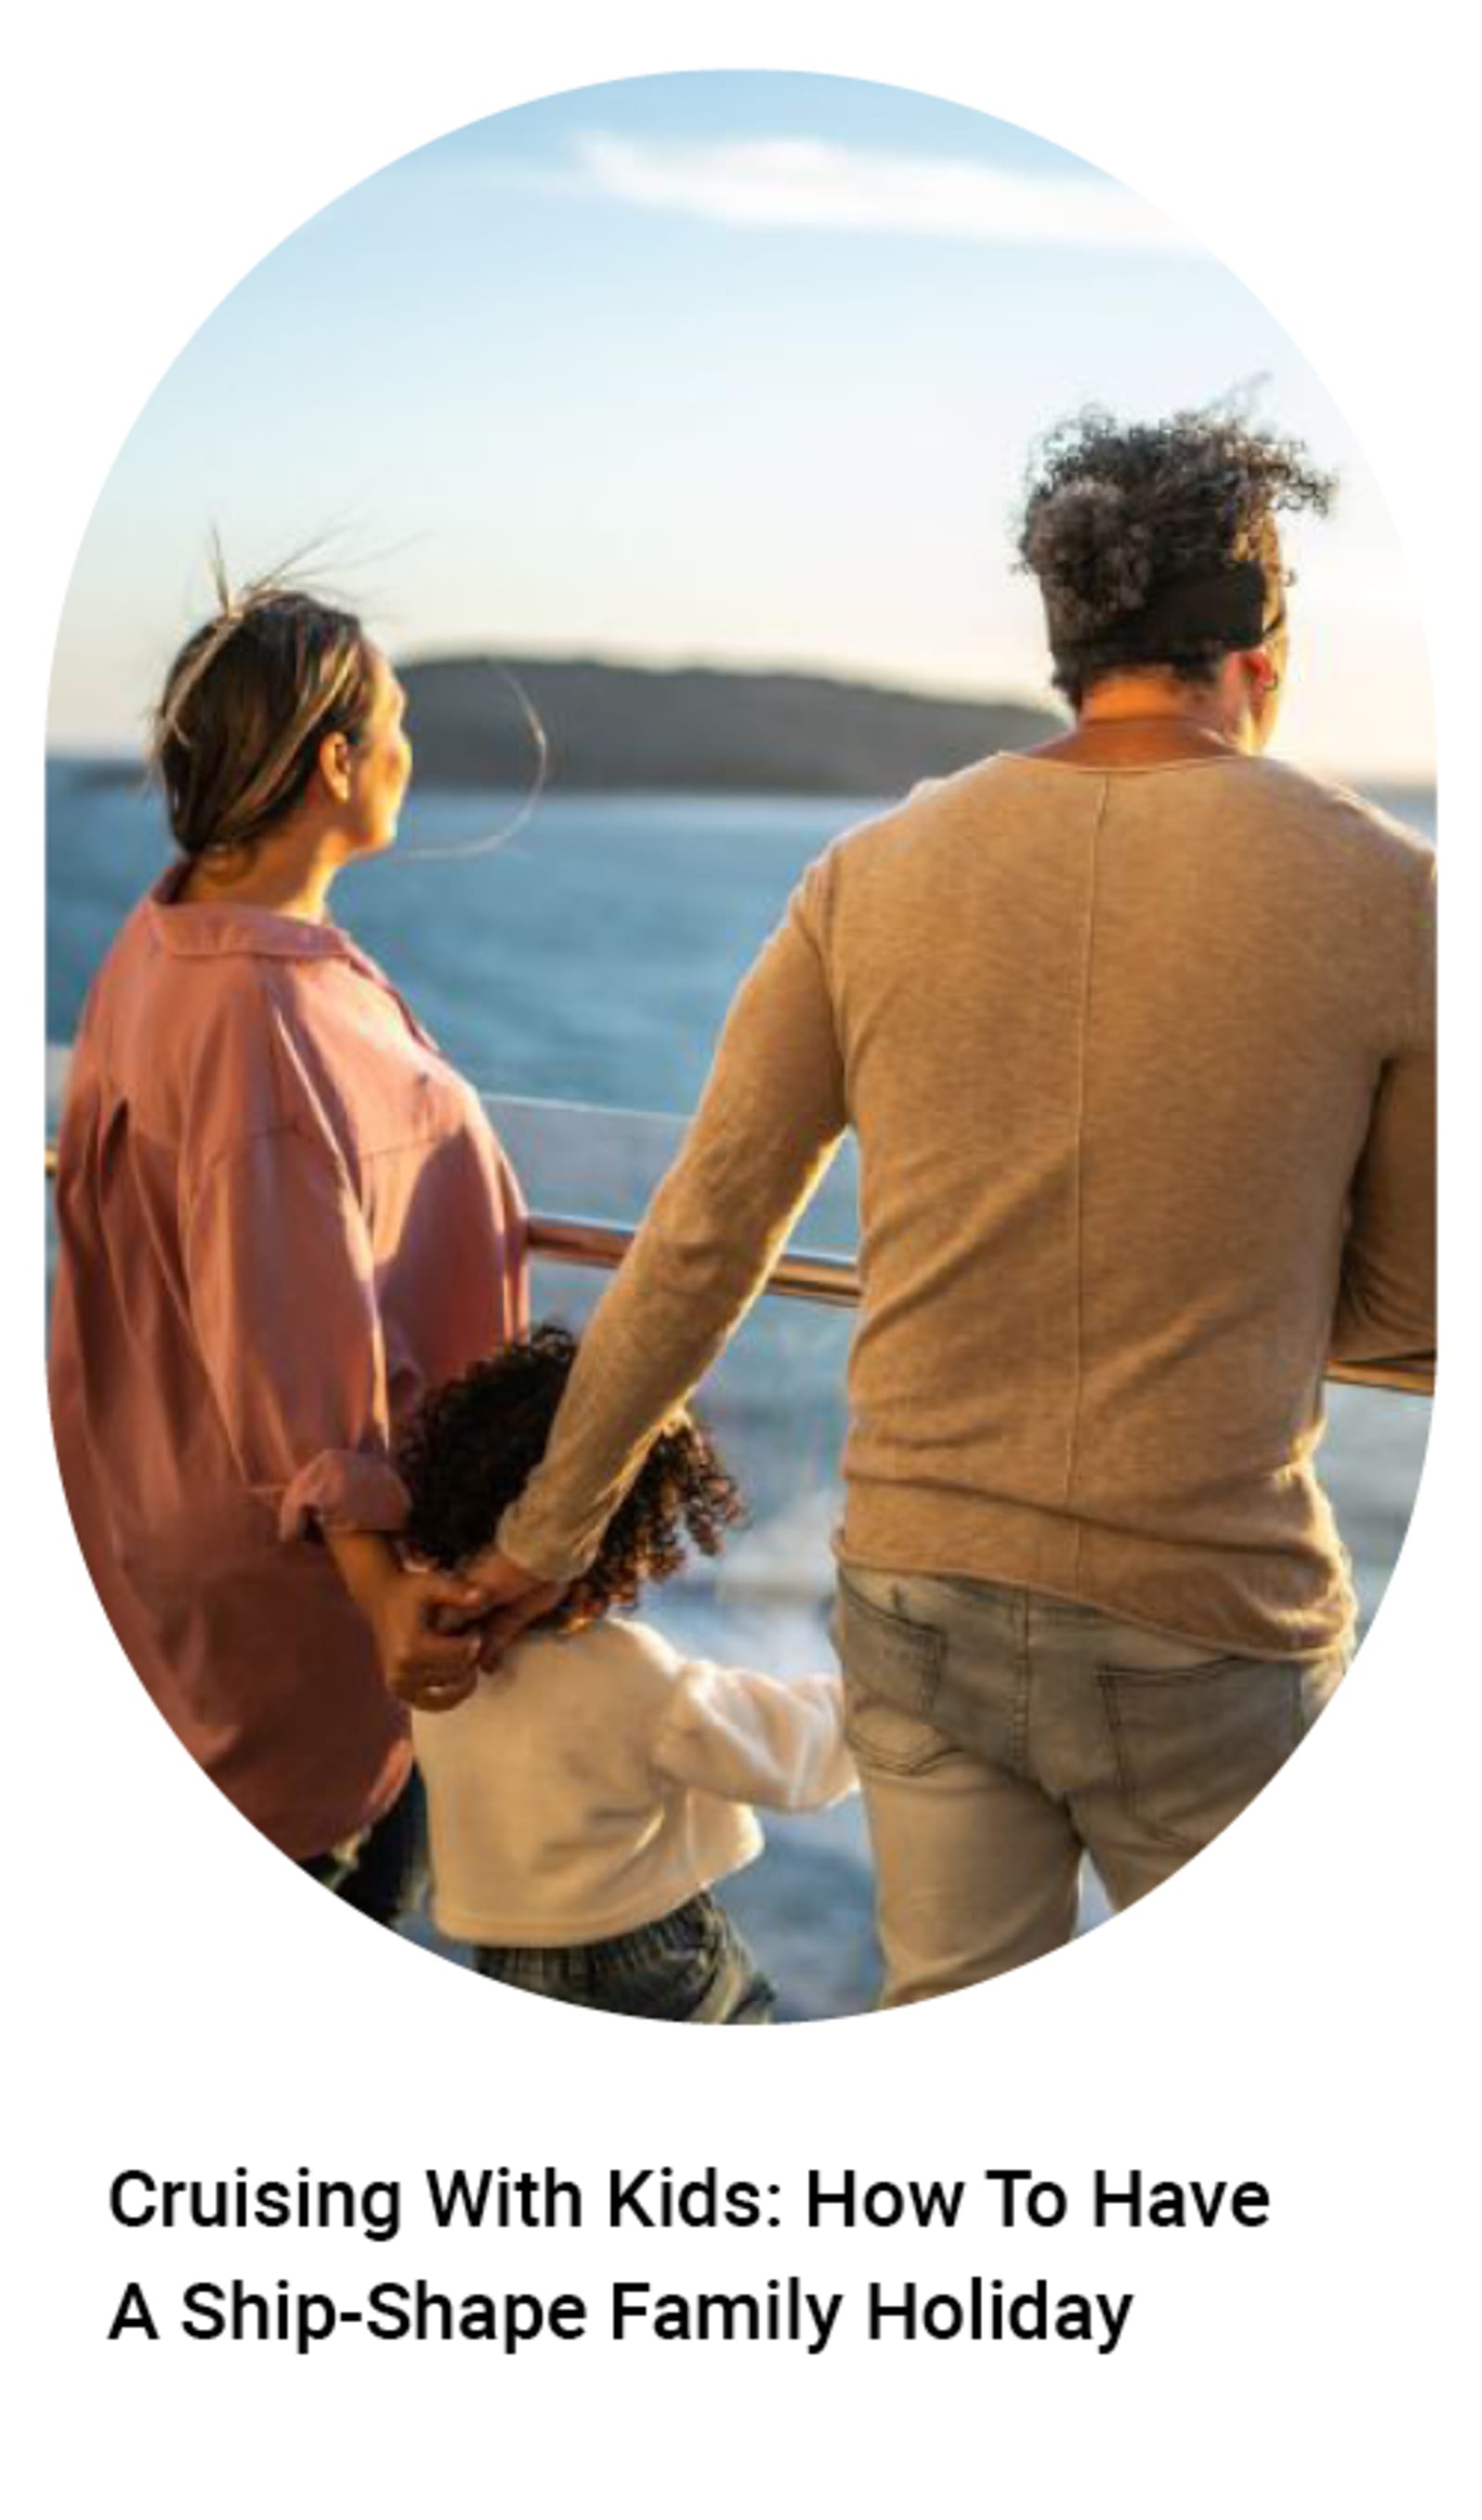 Family looking at a sunset on a cruise ship - Cruising with kids: how to have a ship-shape family holiday